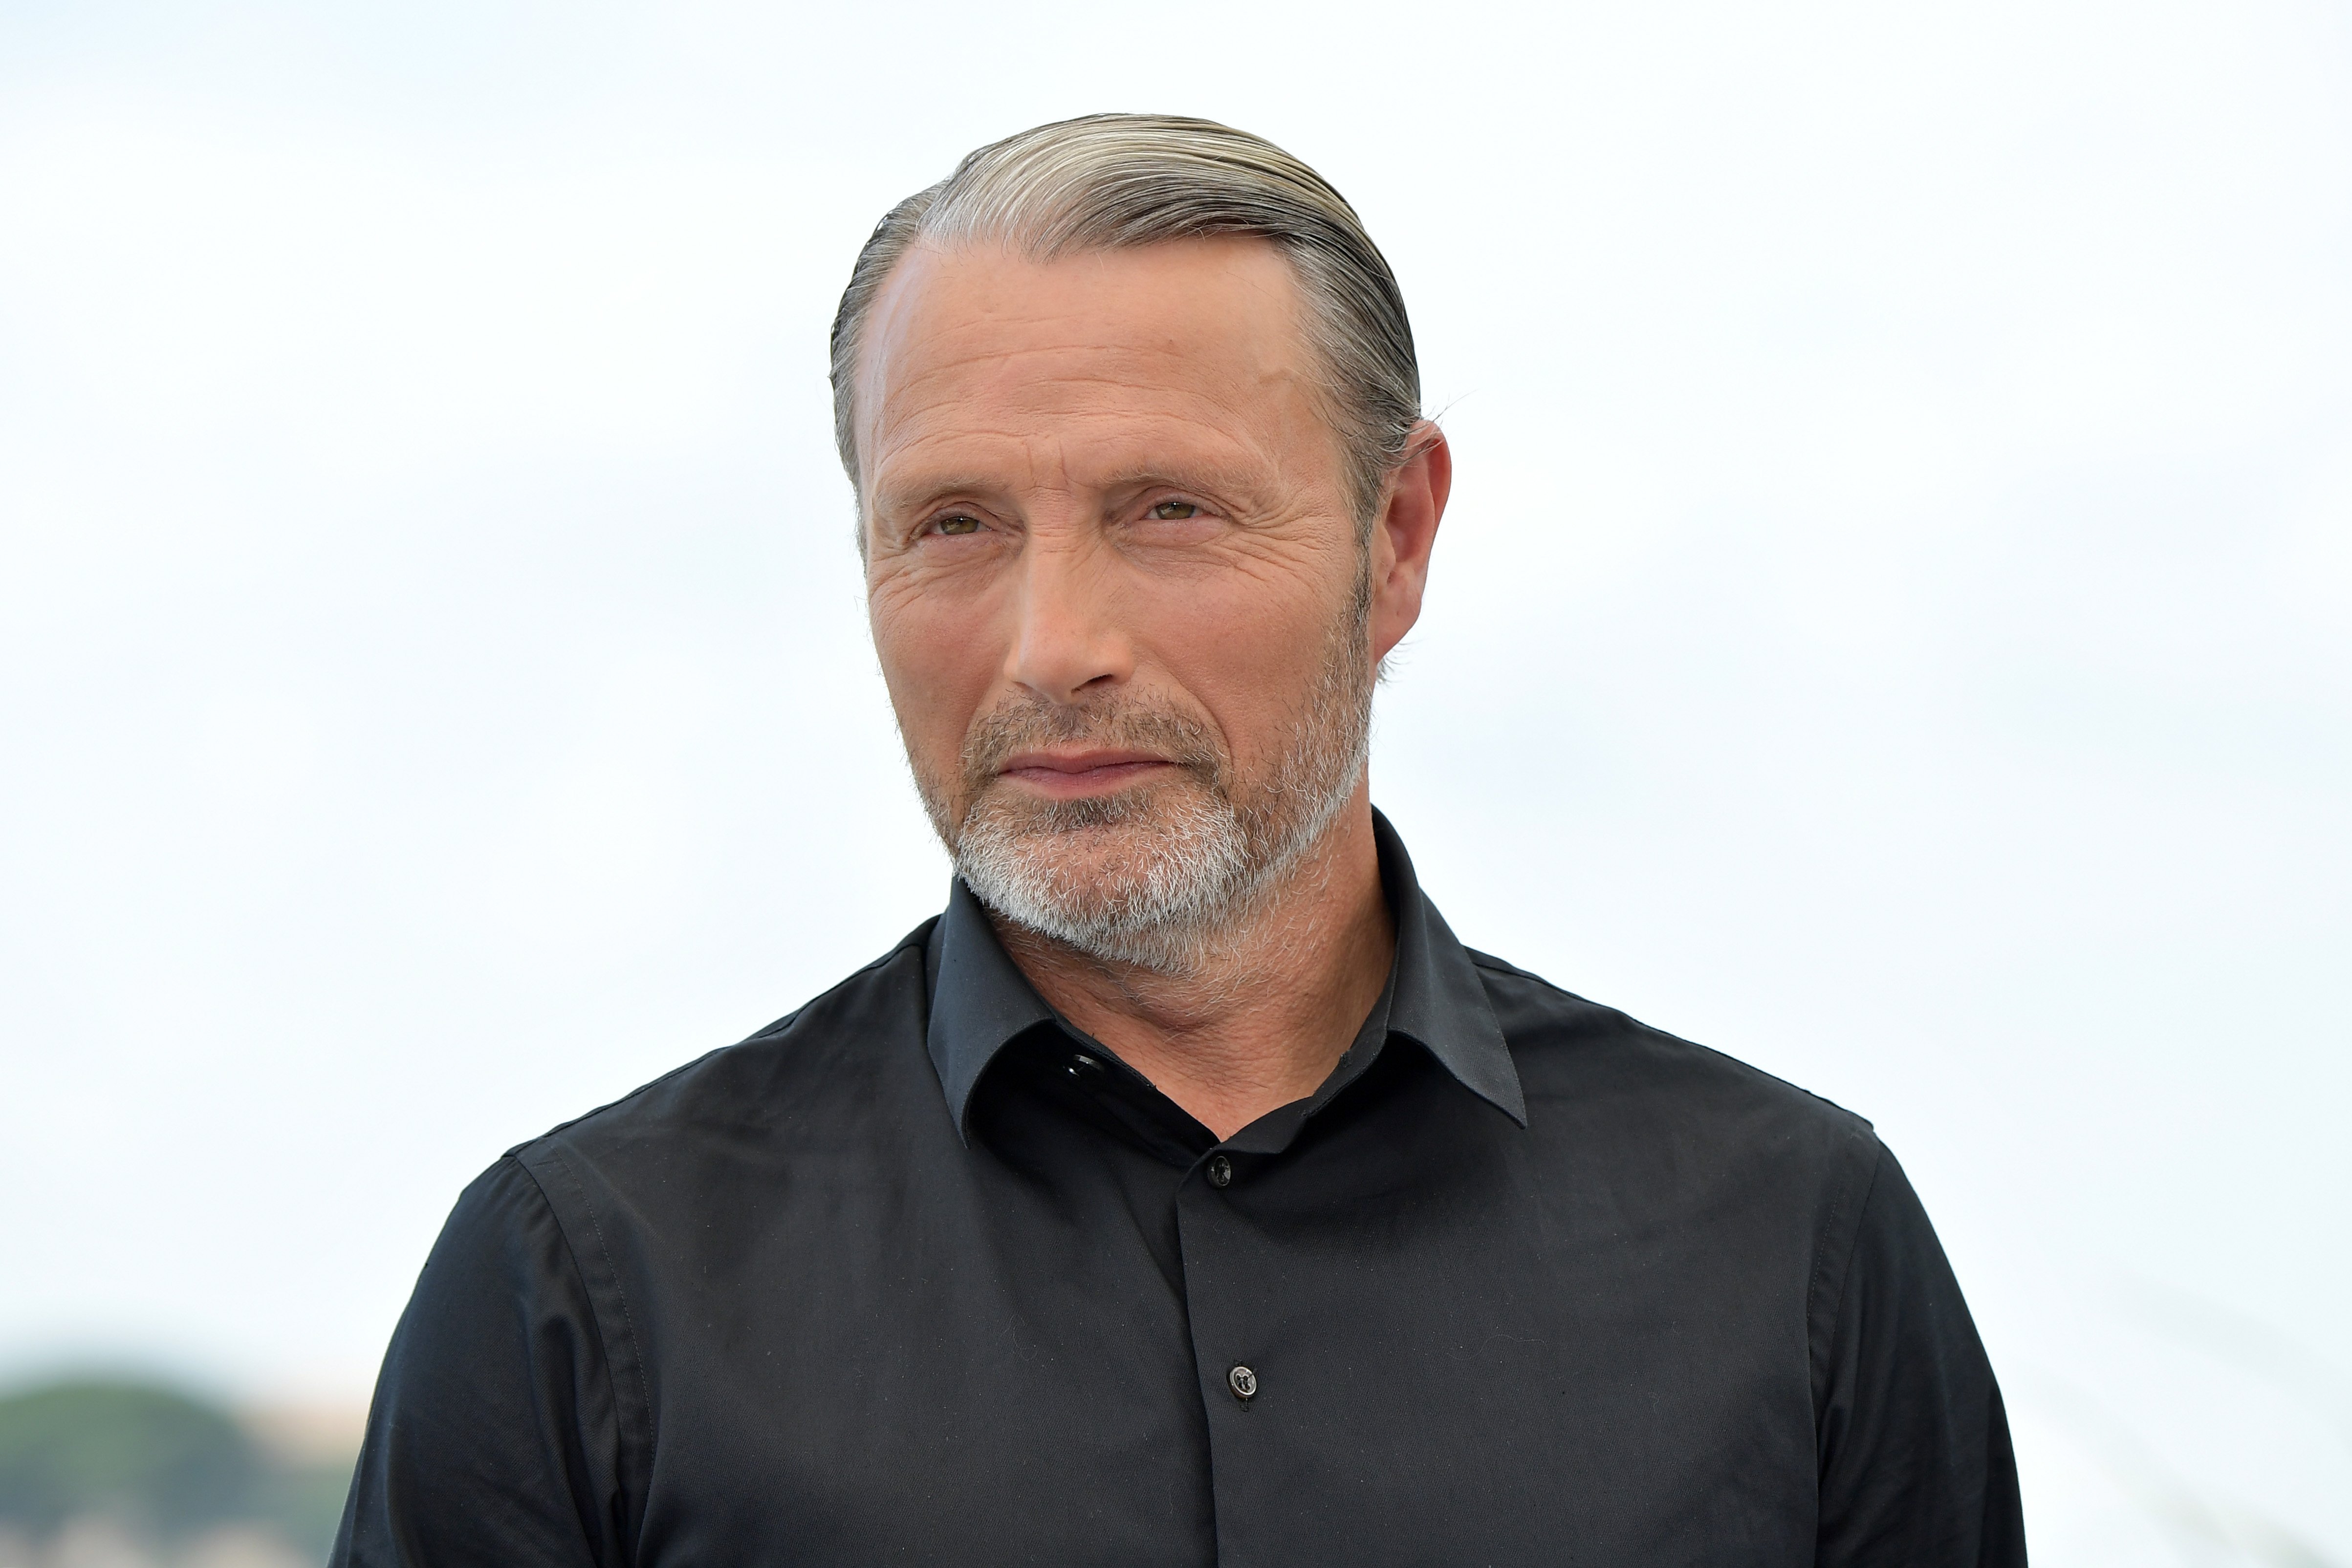 Mads Mikkelsen, who replaced Johnny Depp in Fantastic Beasts, attends a photocall for the 75th annual Cannes film festival